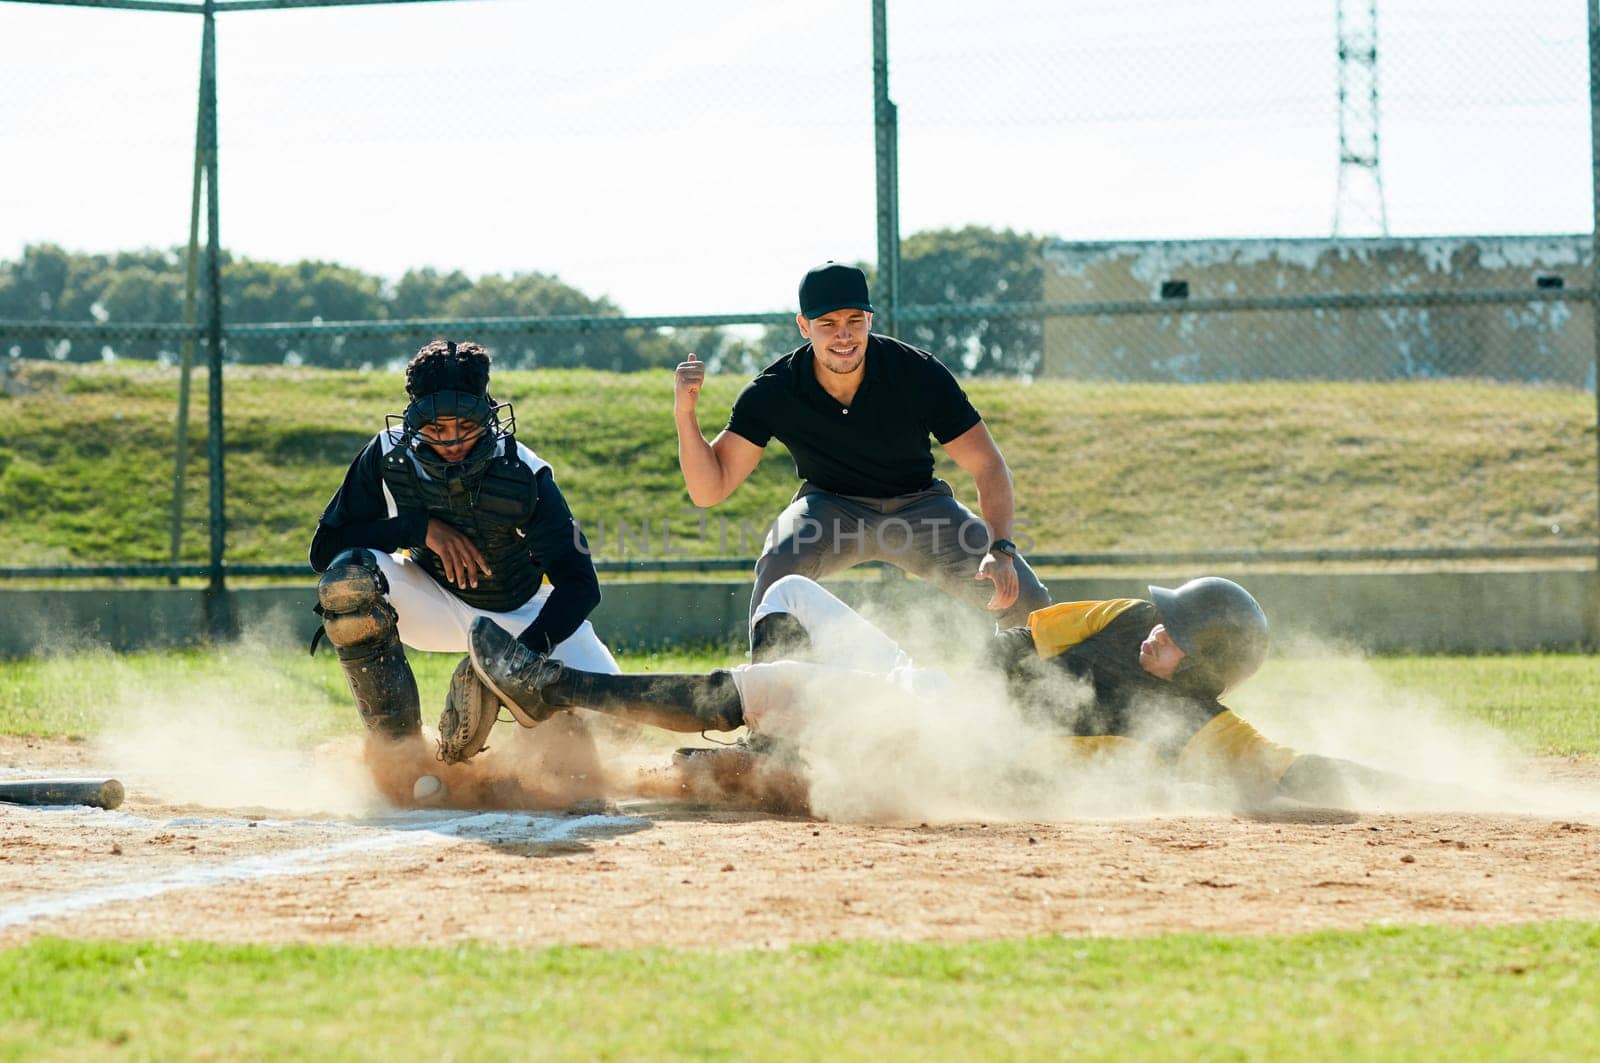 Sliding into base is his thing. Full length shot of a young baseball player reaching base during a match on the field